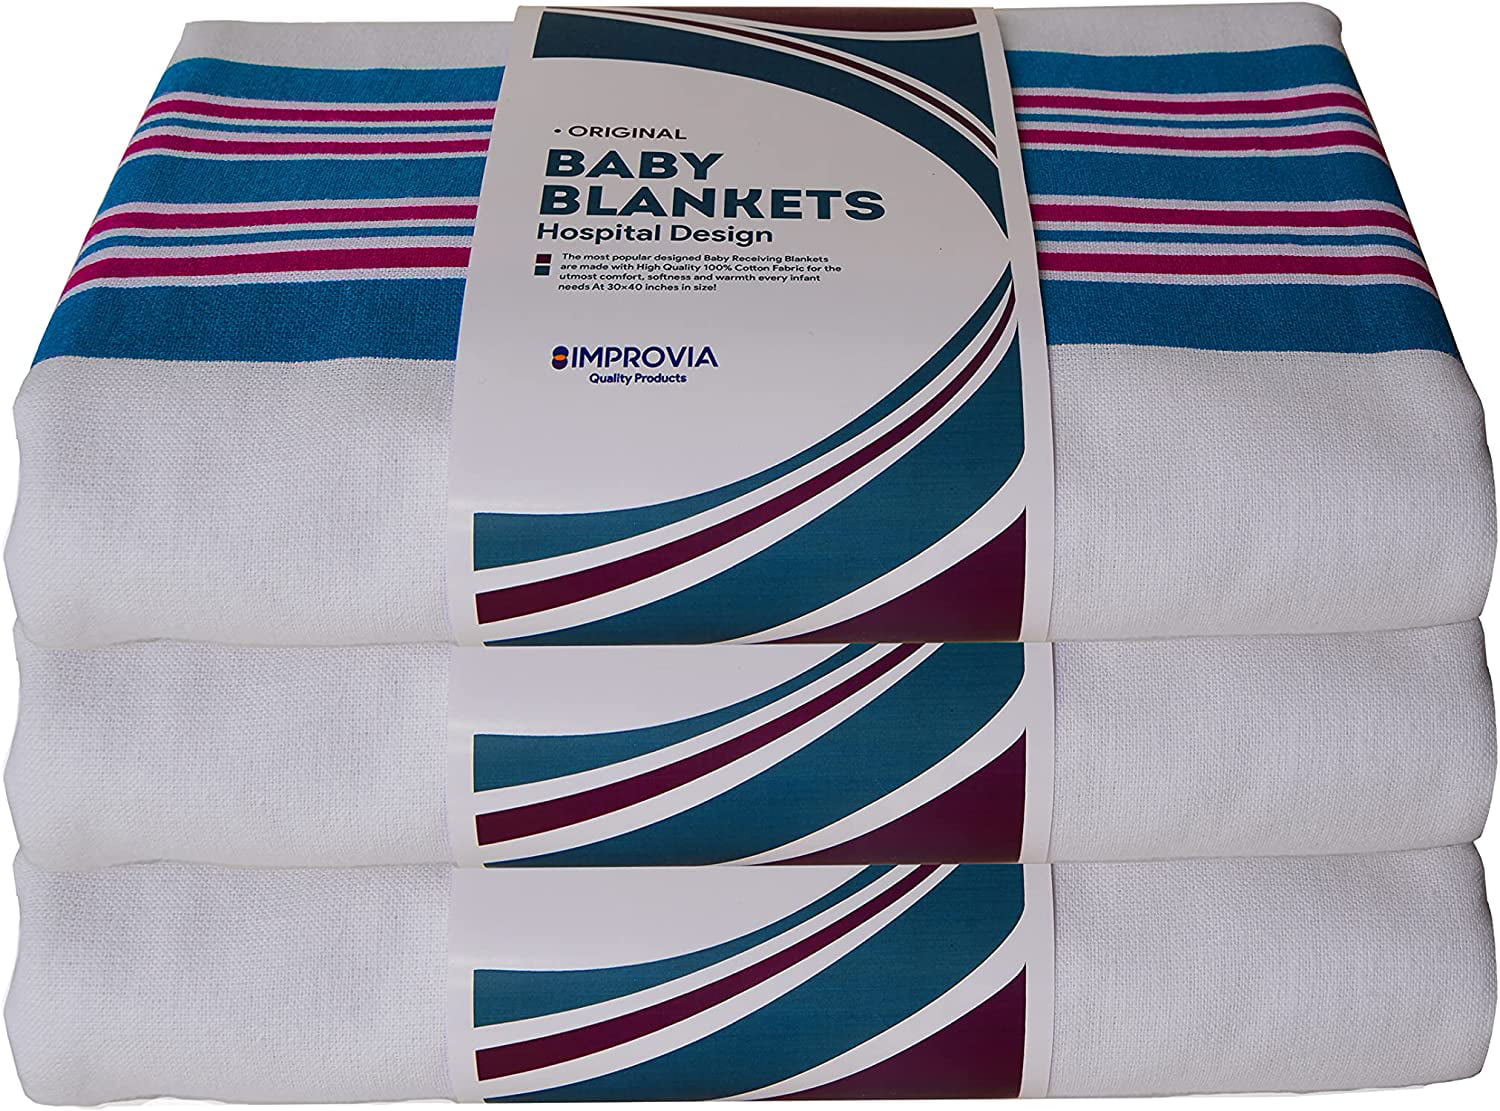 BABY INFANT HOSPITAL RECEIVING BLANKETS 100% COTTON WARM BLANKETS 30x40-4 PK 